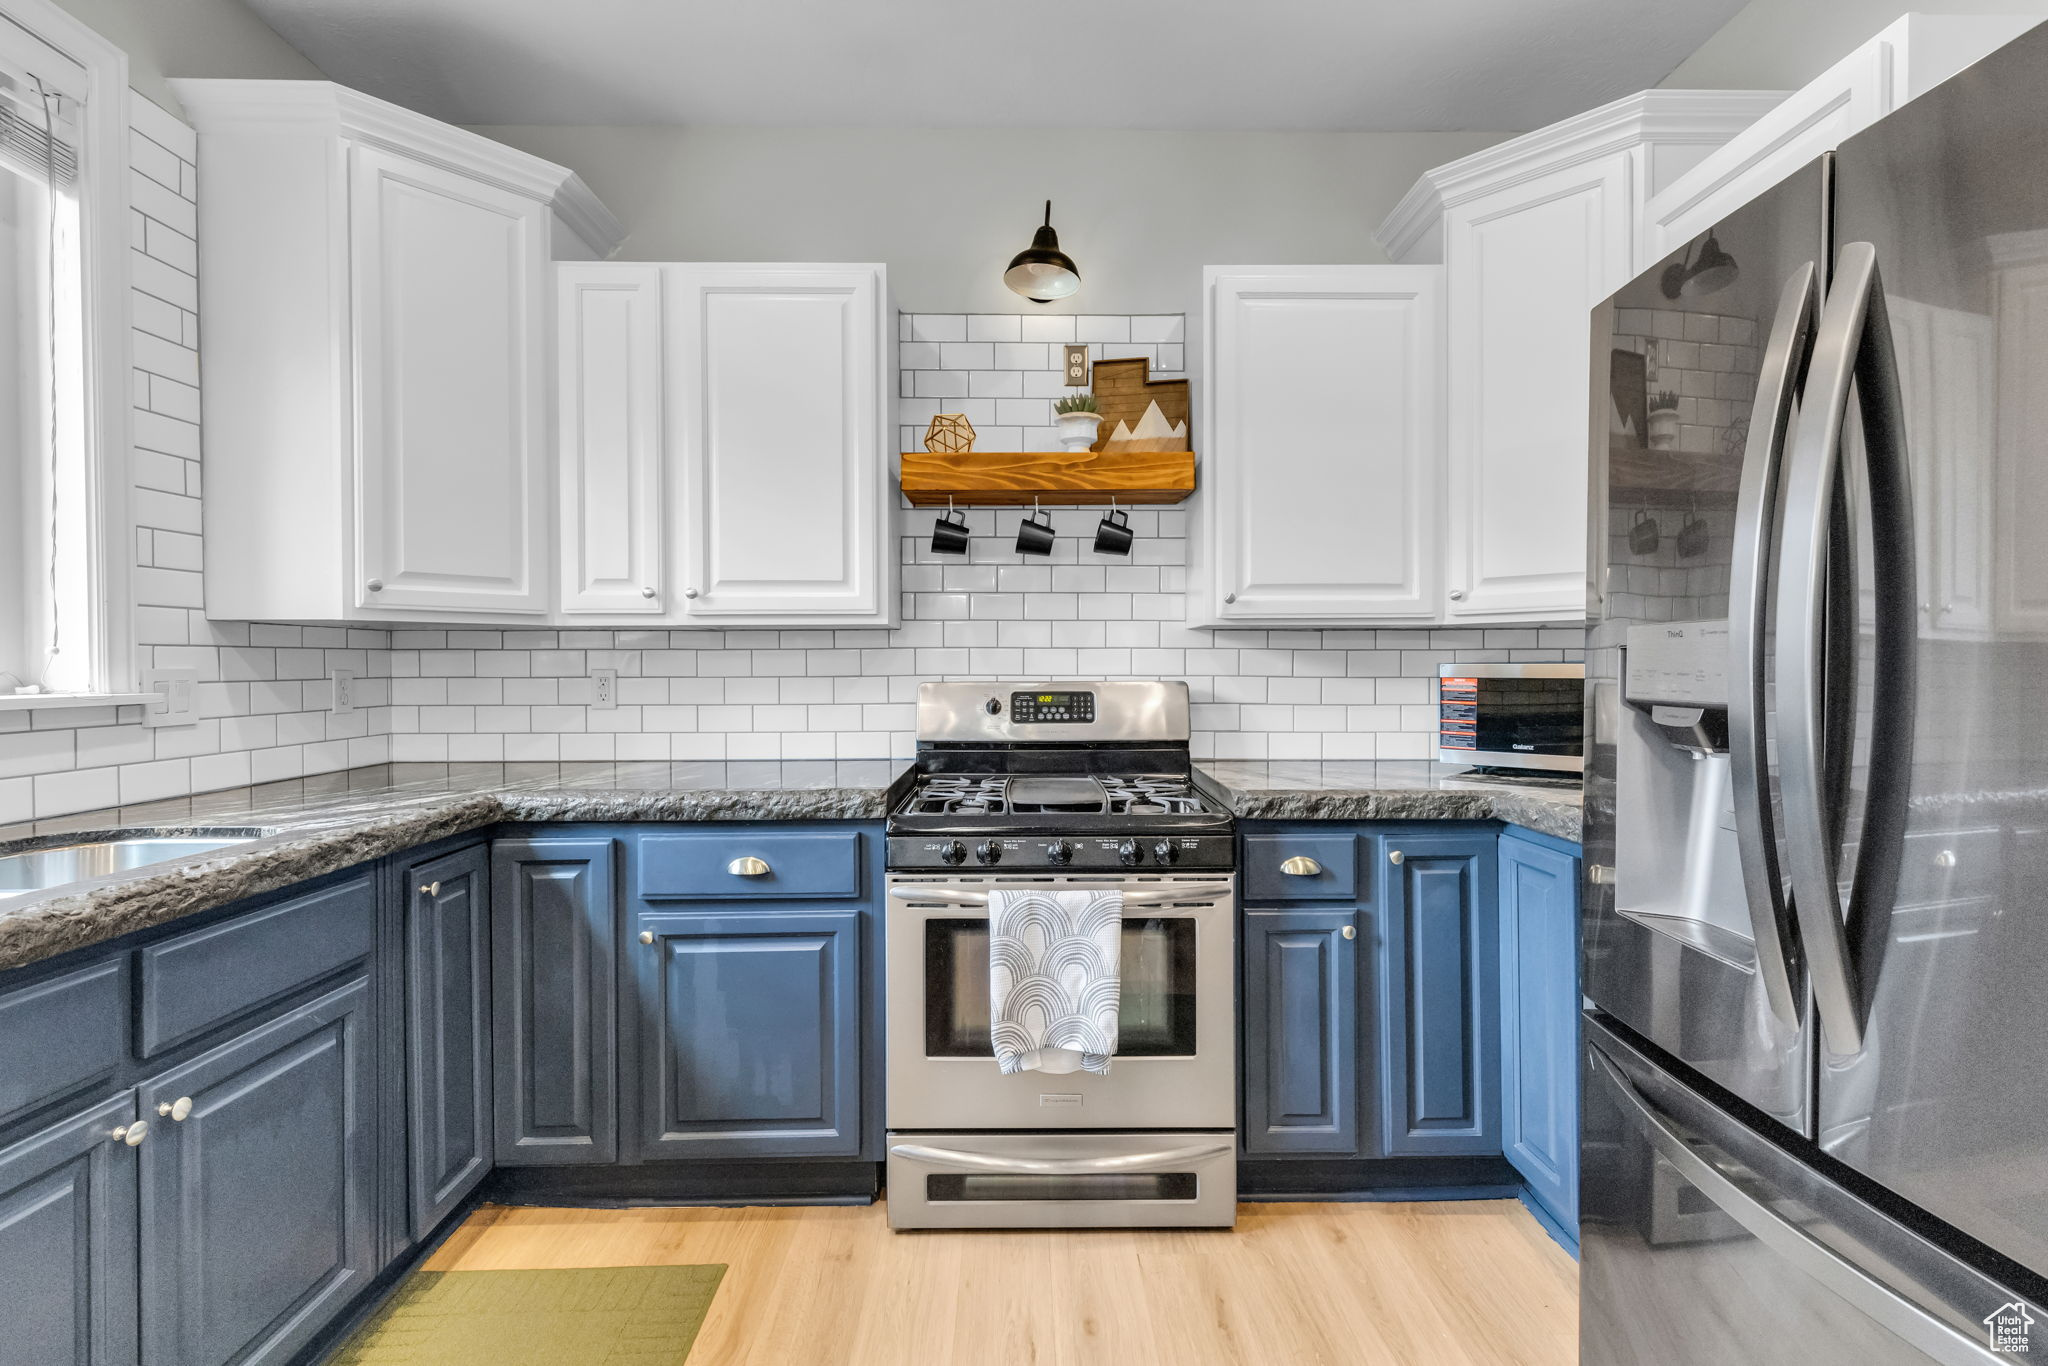 Kitchen with appliances with stainless steel finishes, tasteful backsplash, light wood-type flooring, and white cabinetry